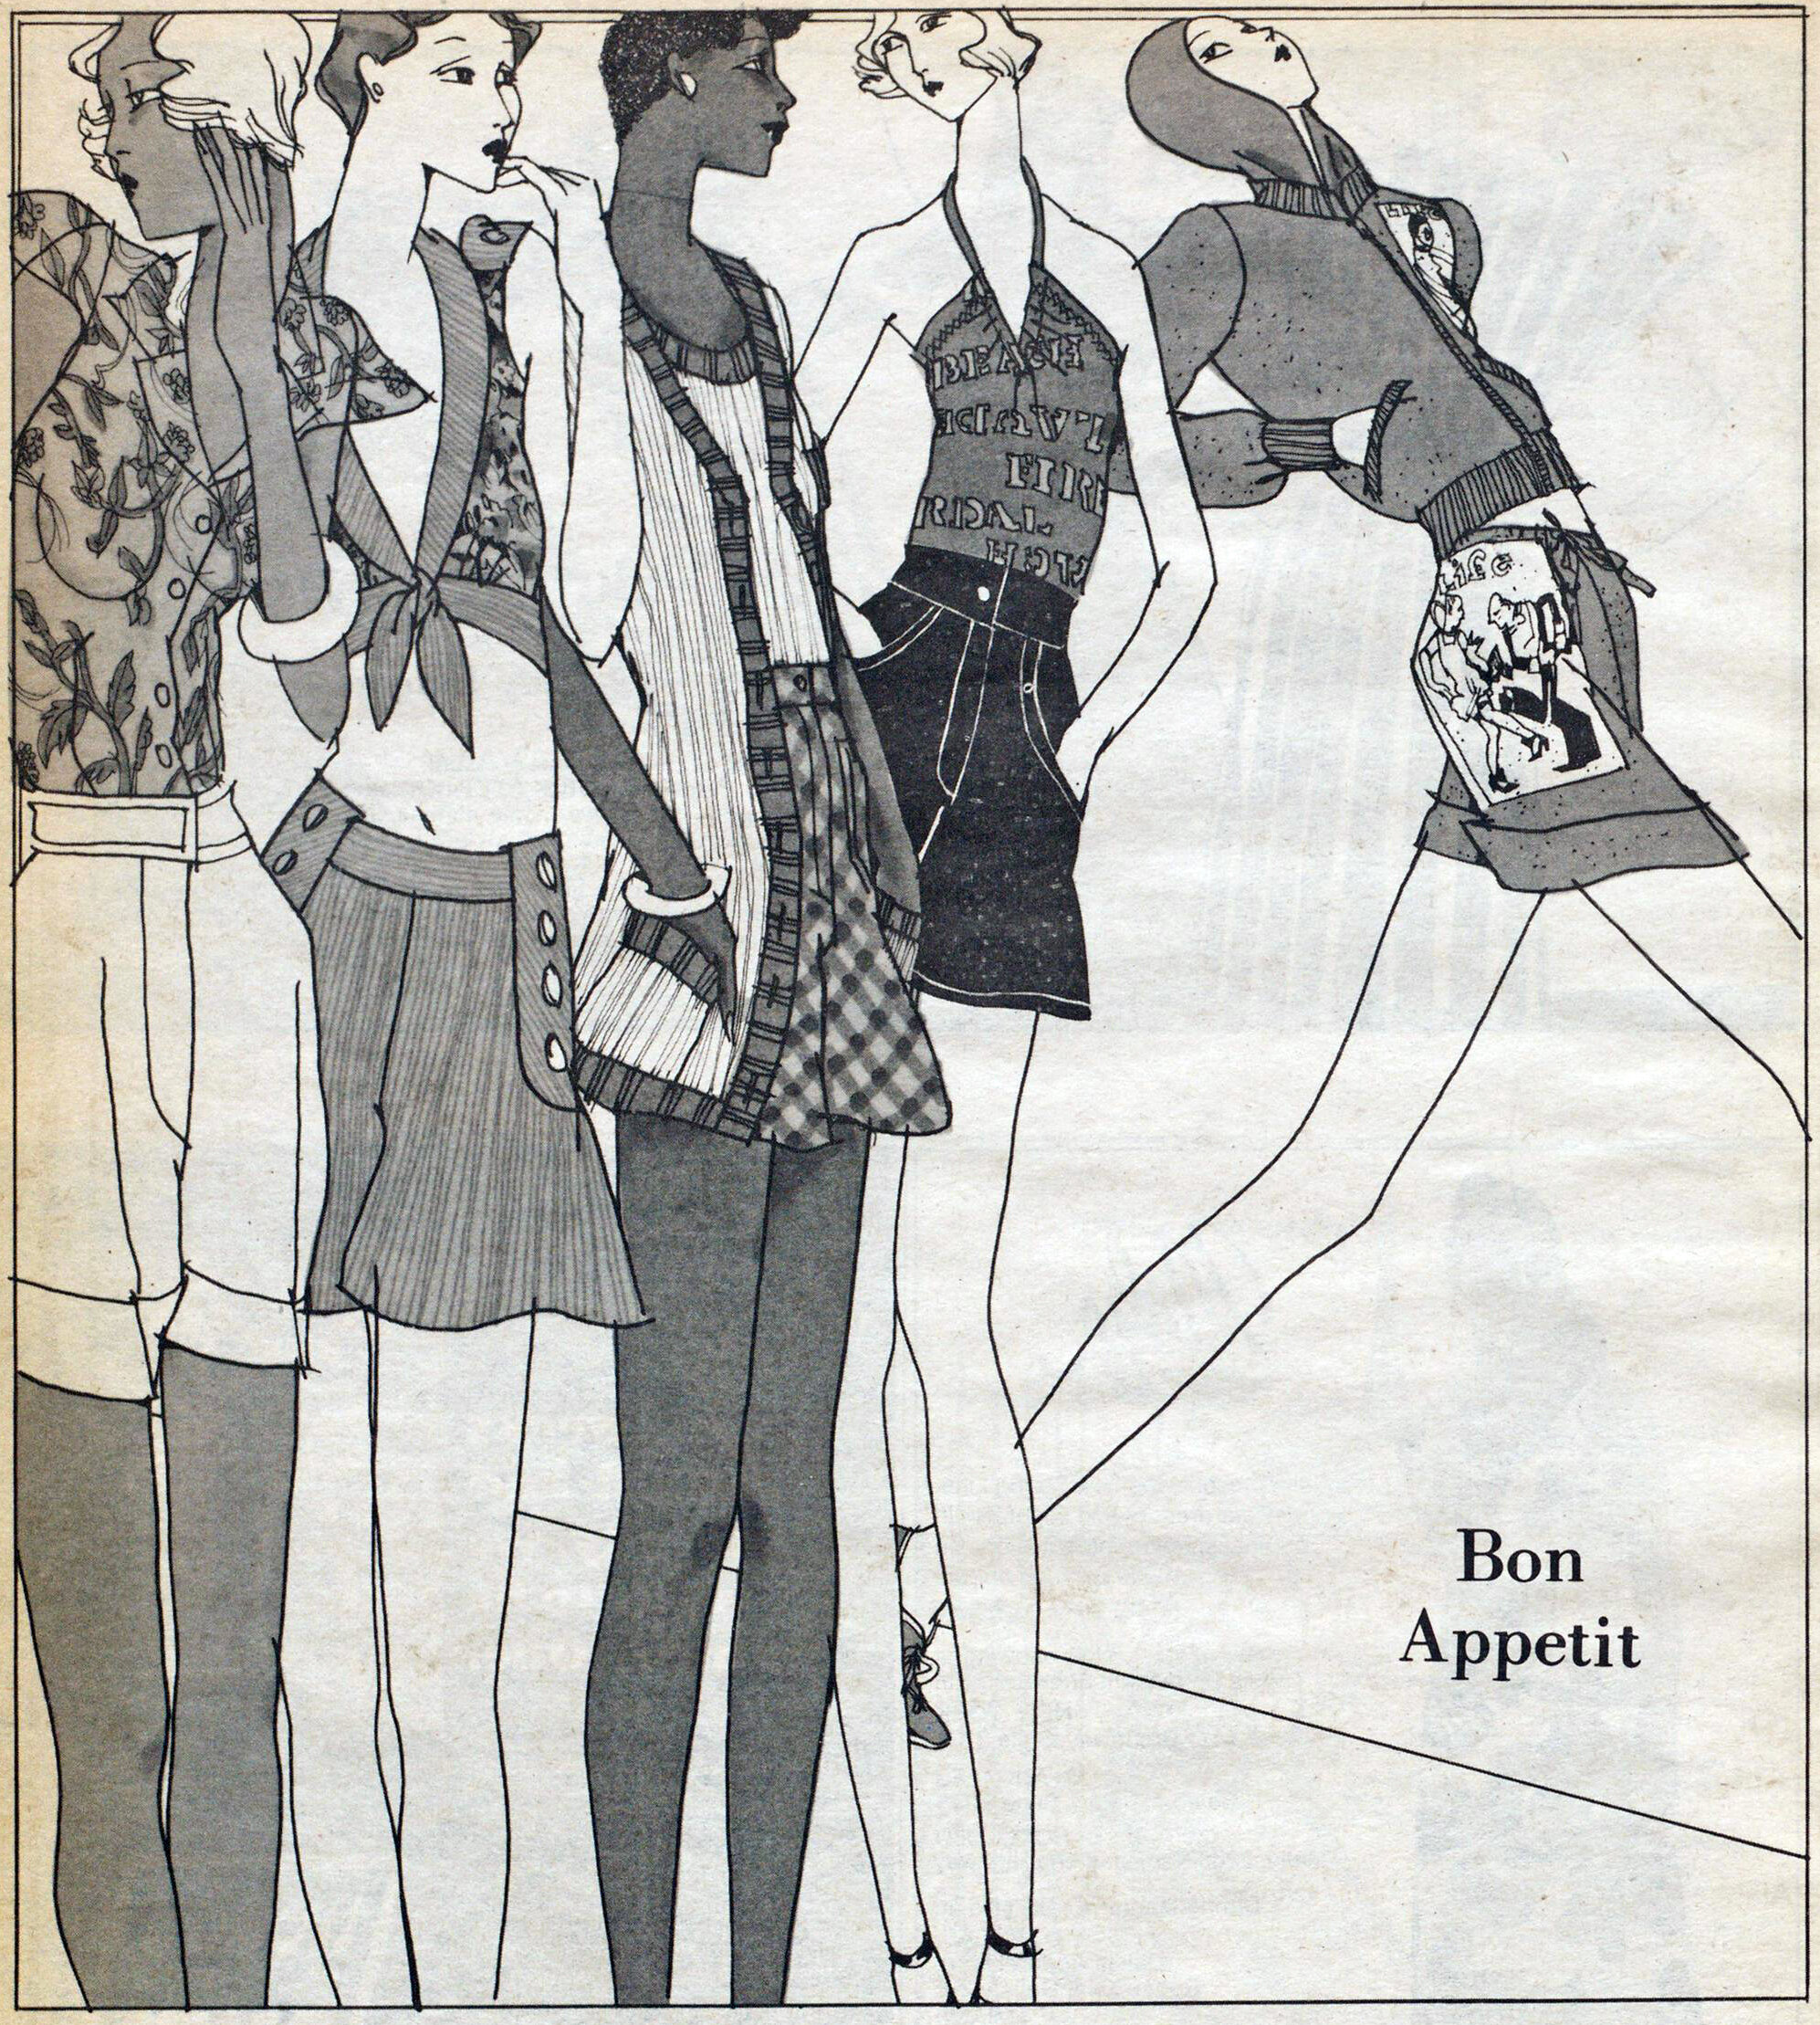 Third from left, Tere Tereba for Tootique. Women’s Wear Daily, January 2, 1974.